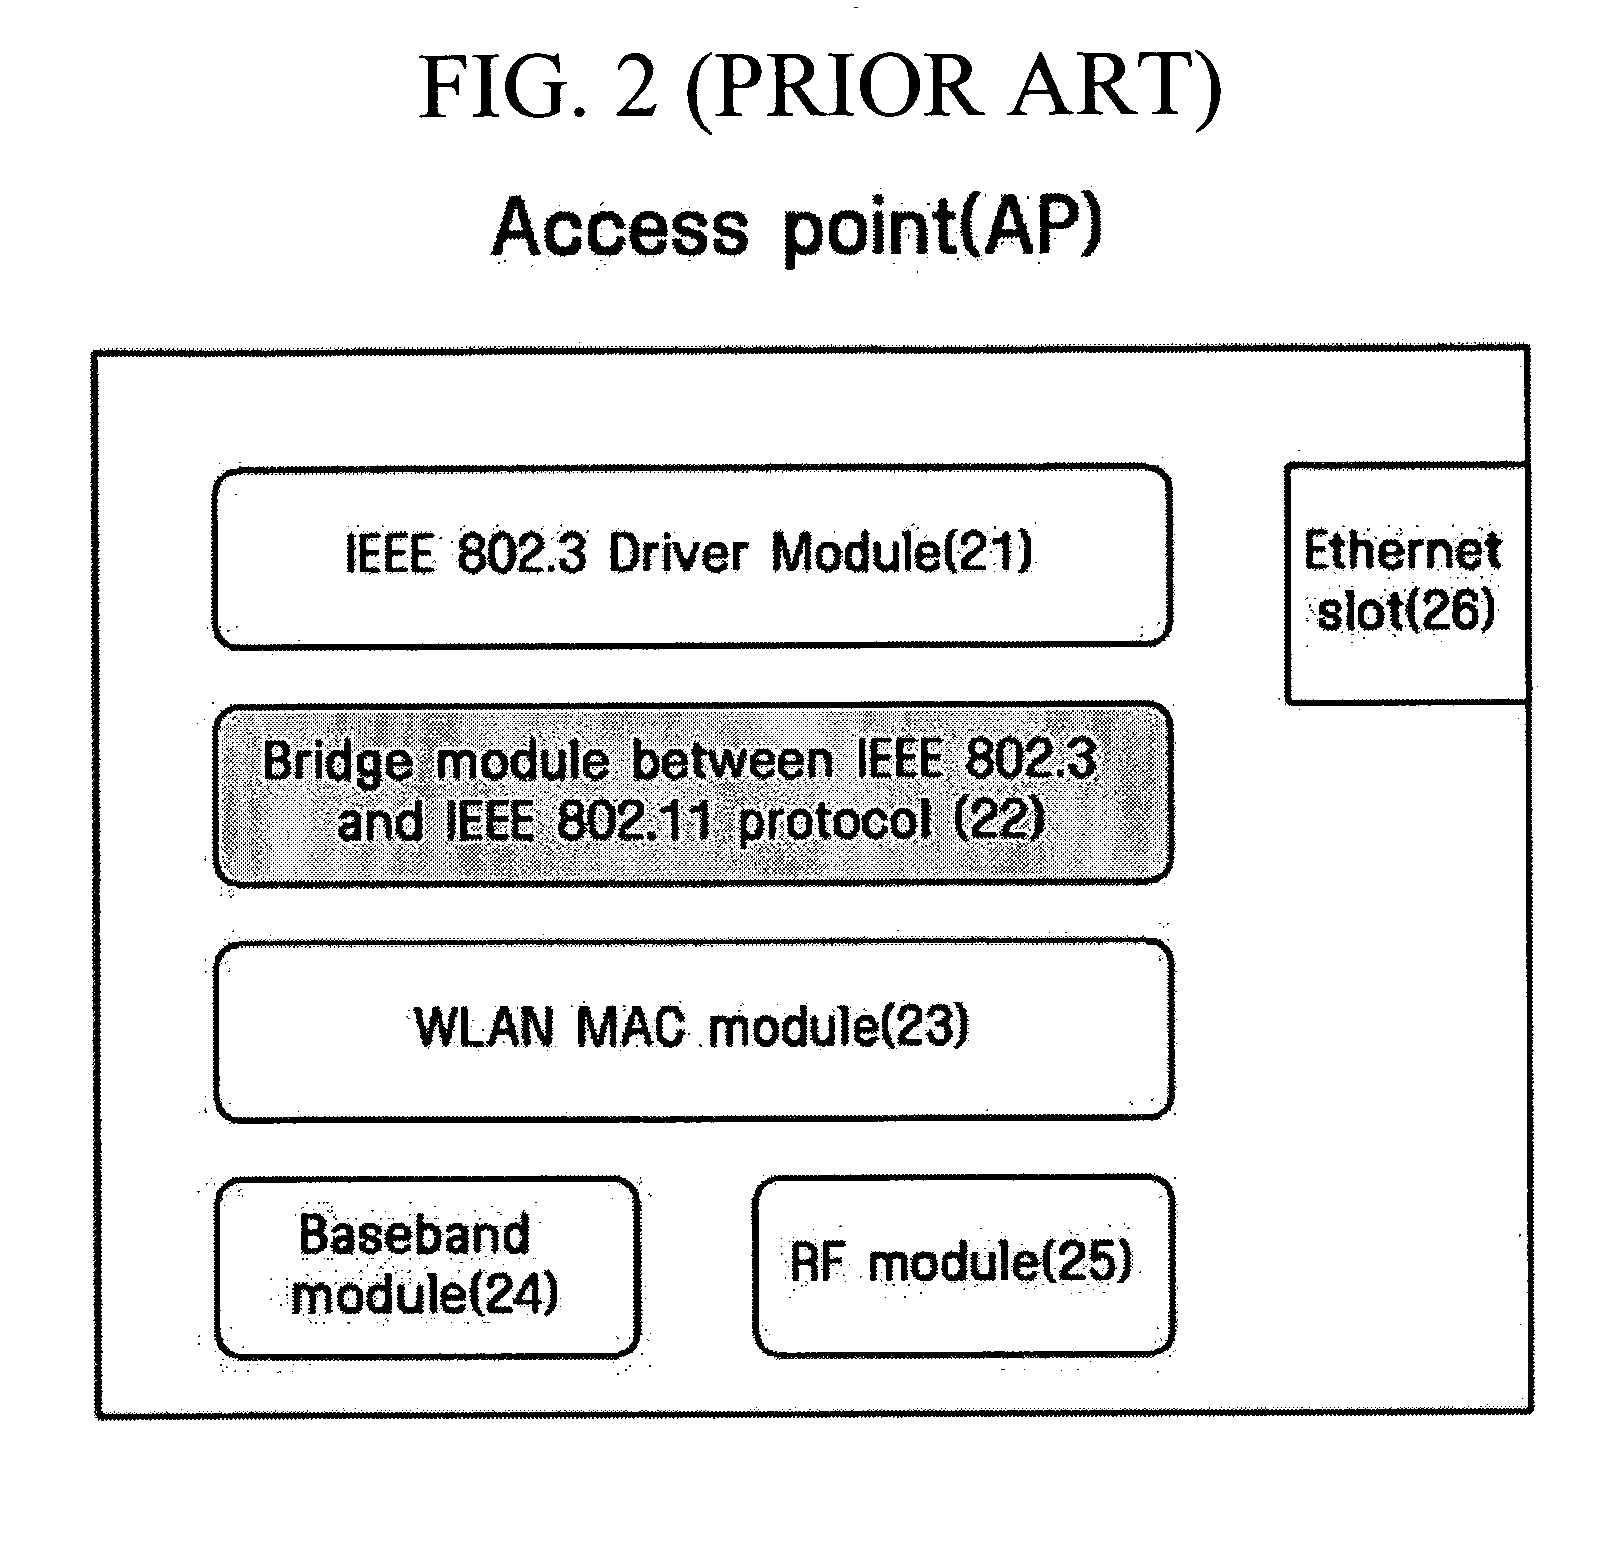 Apparatus and method for transmitting data between wireless and wired networks